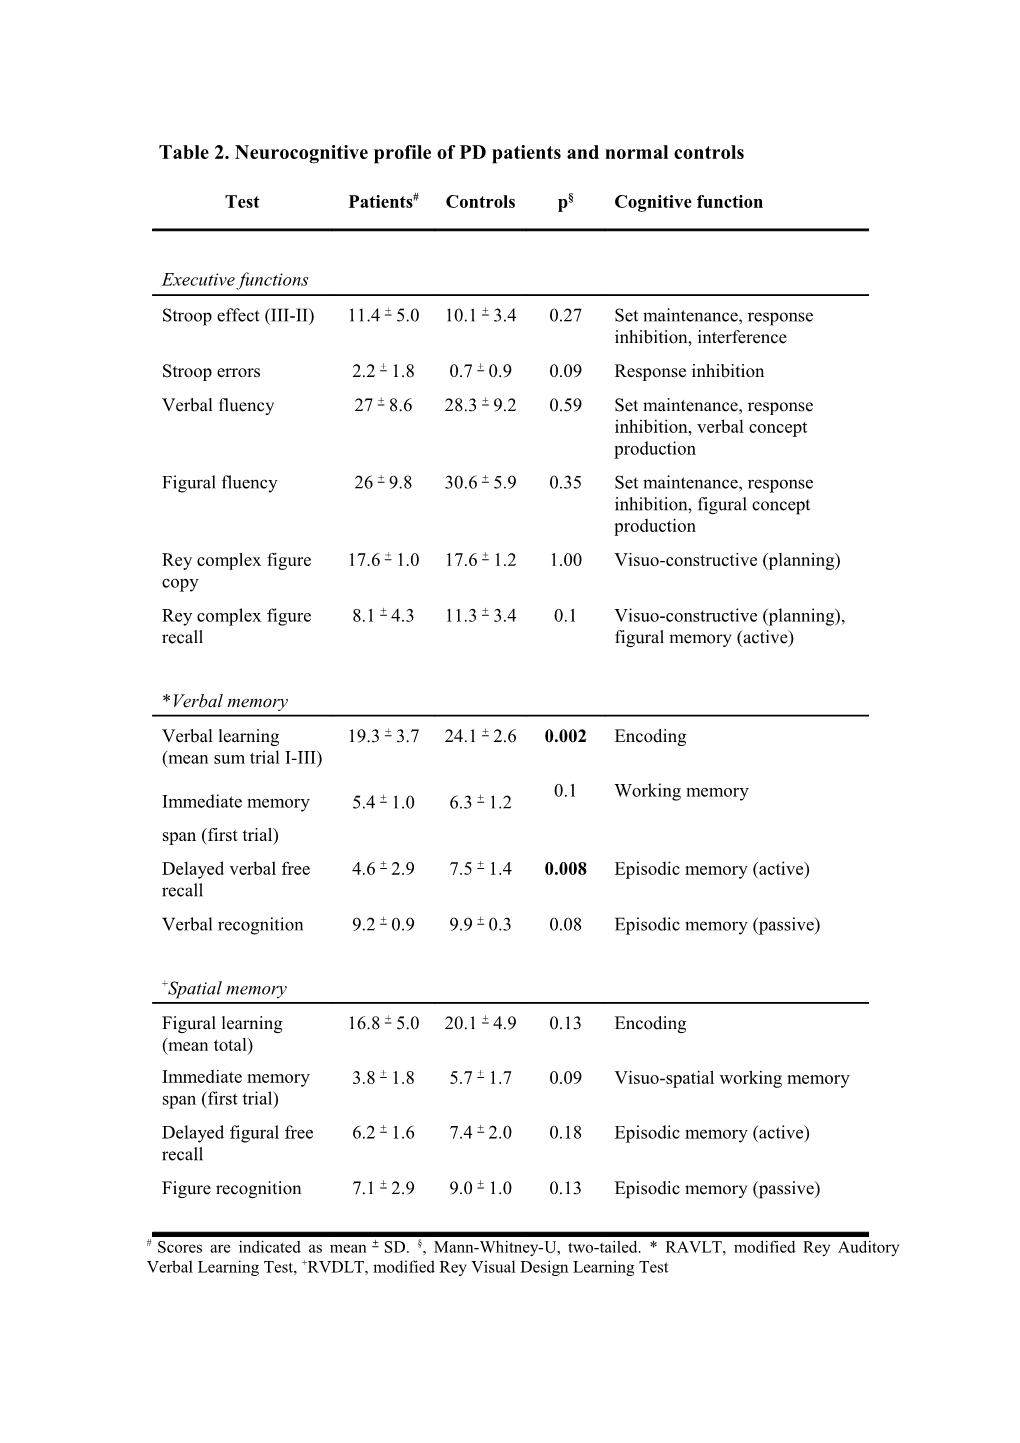 Table 2. Neurocognitive Profile of PD Patients and Normal Controls